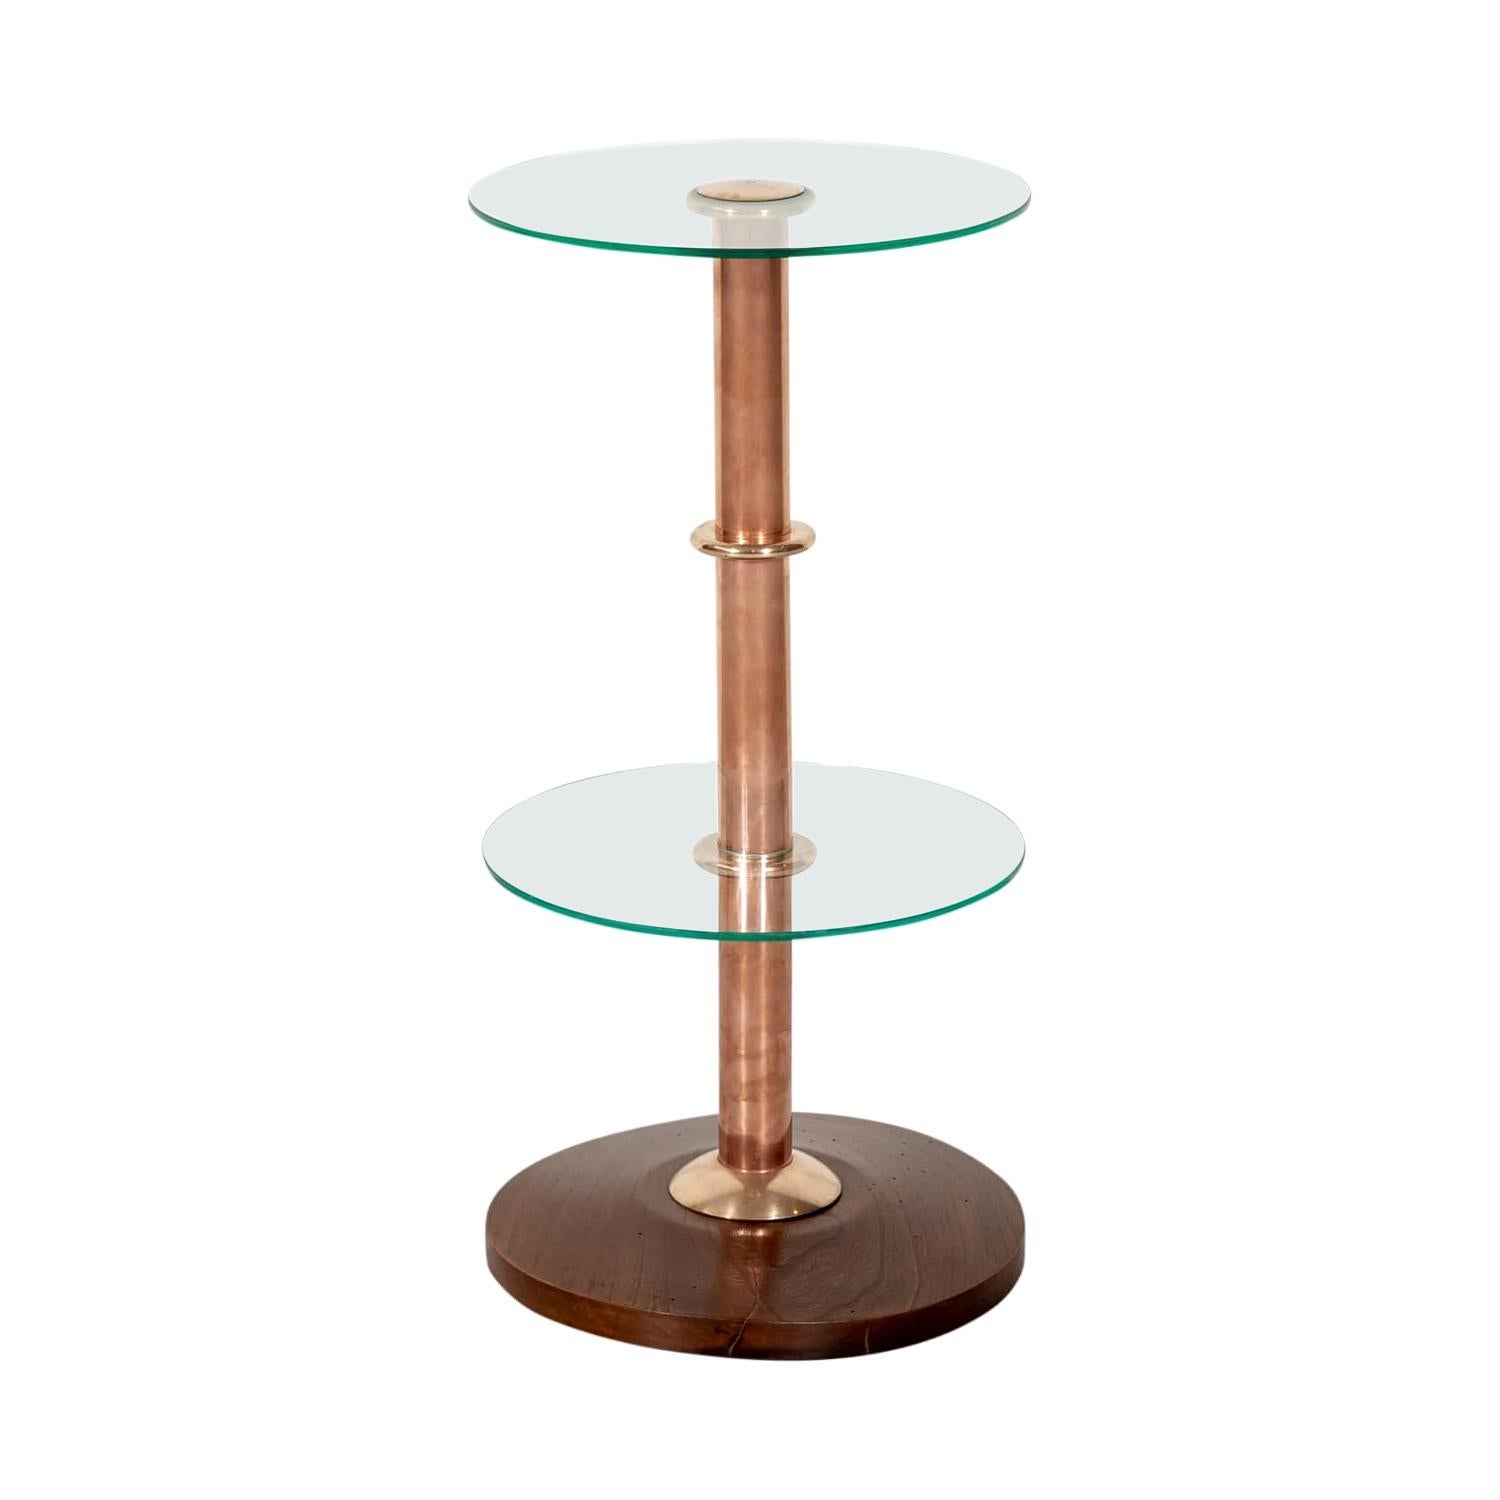 French Art Deco Round Glass, Brass, and Copper Drink Occasional or Side Table